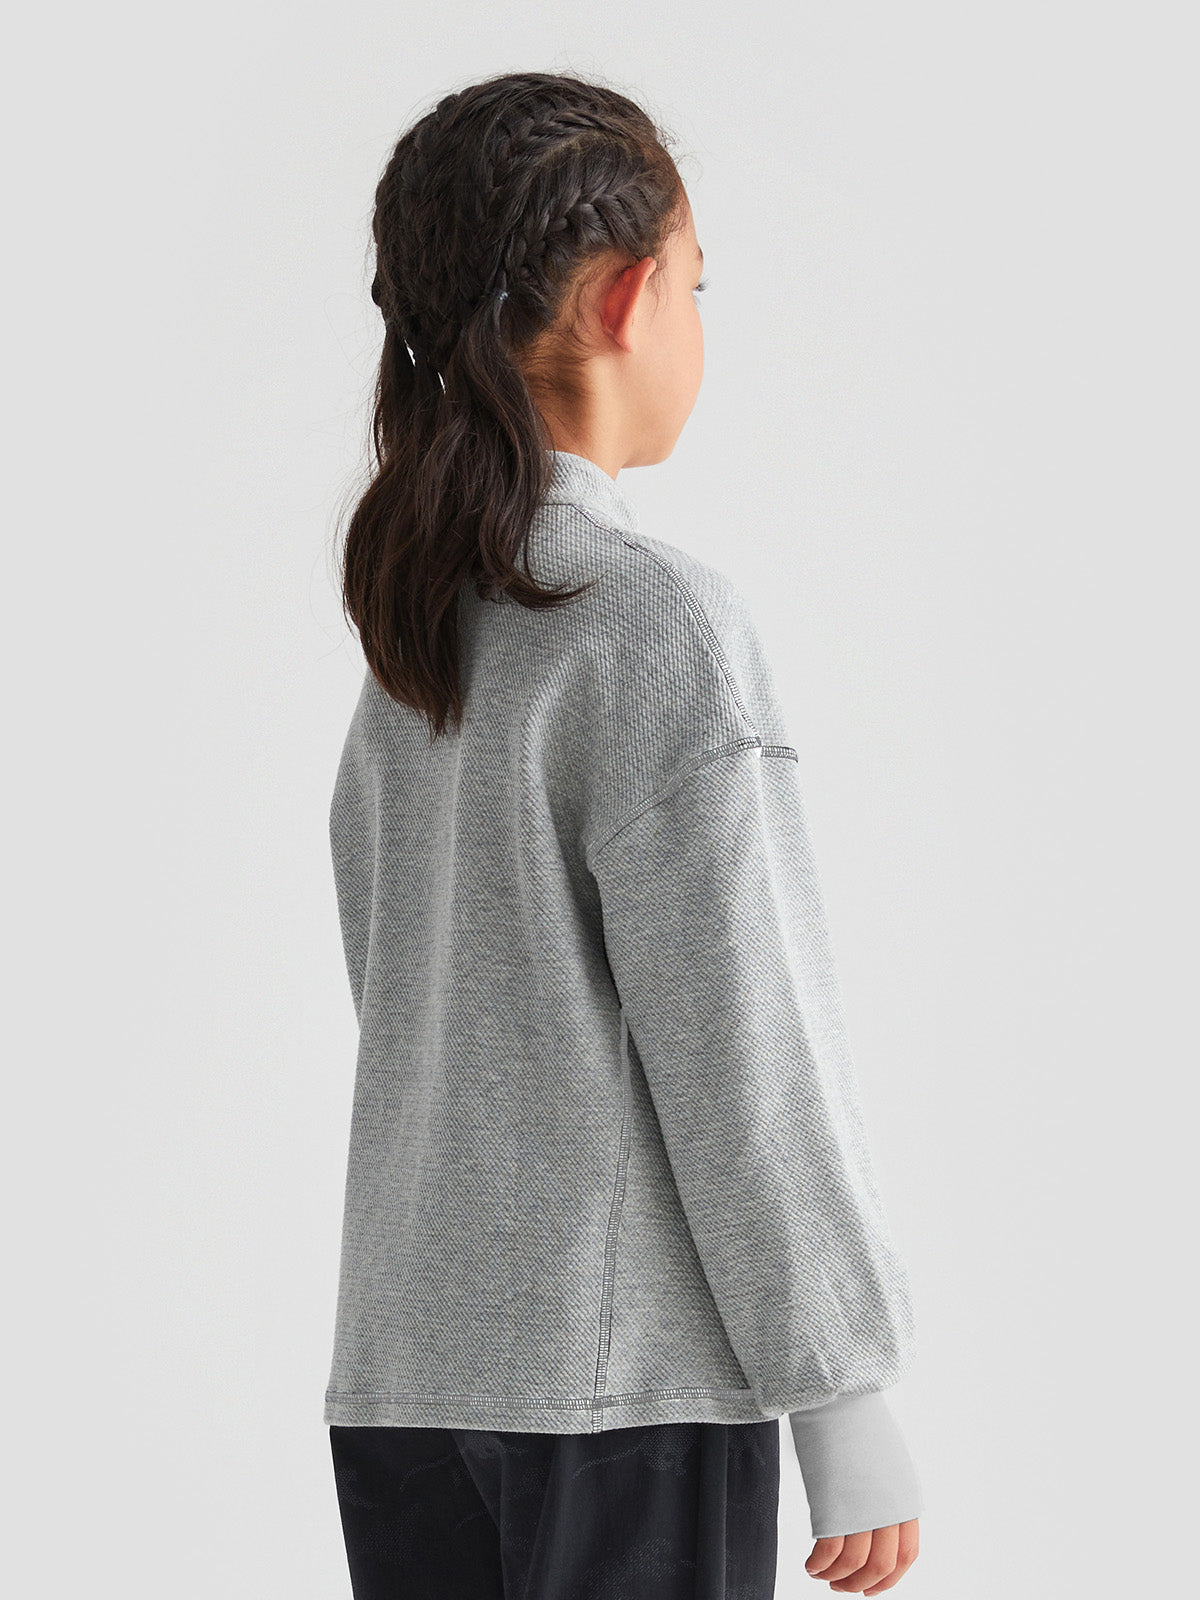 Quarter Zipped Sweater With Drop Shoulder